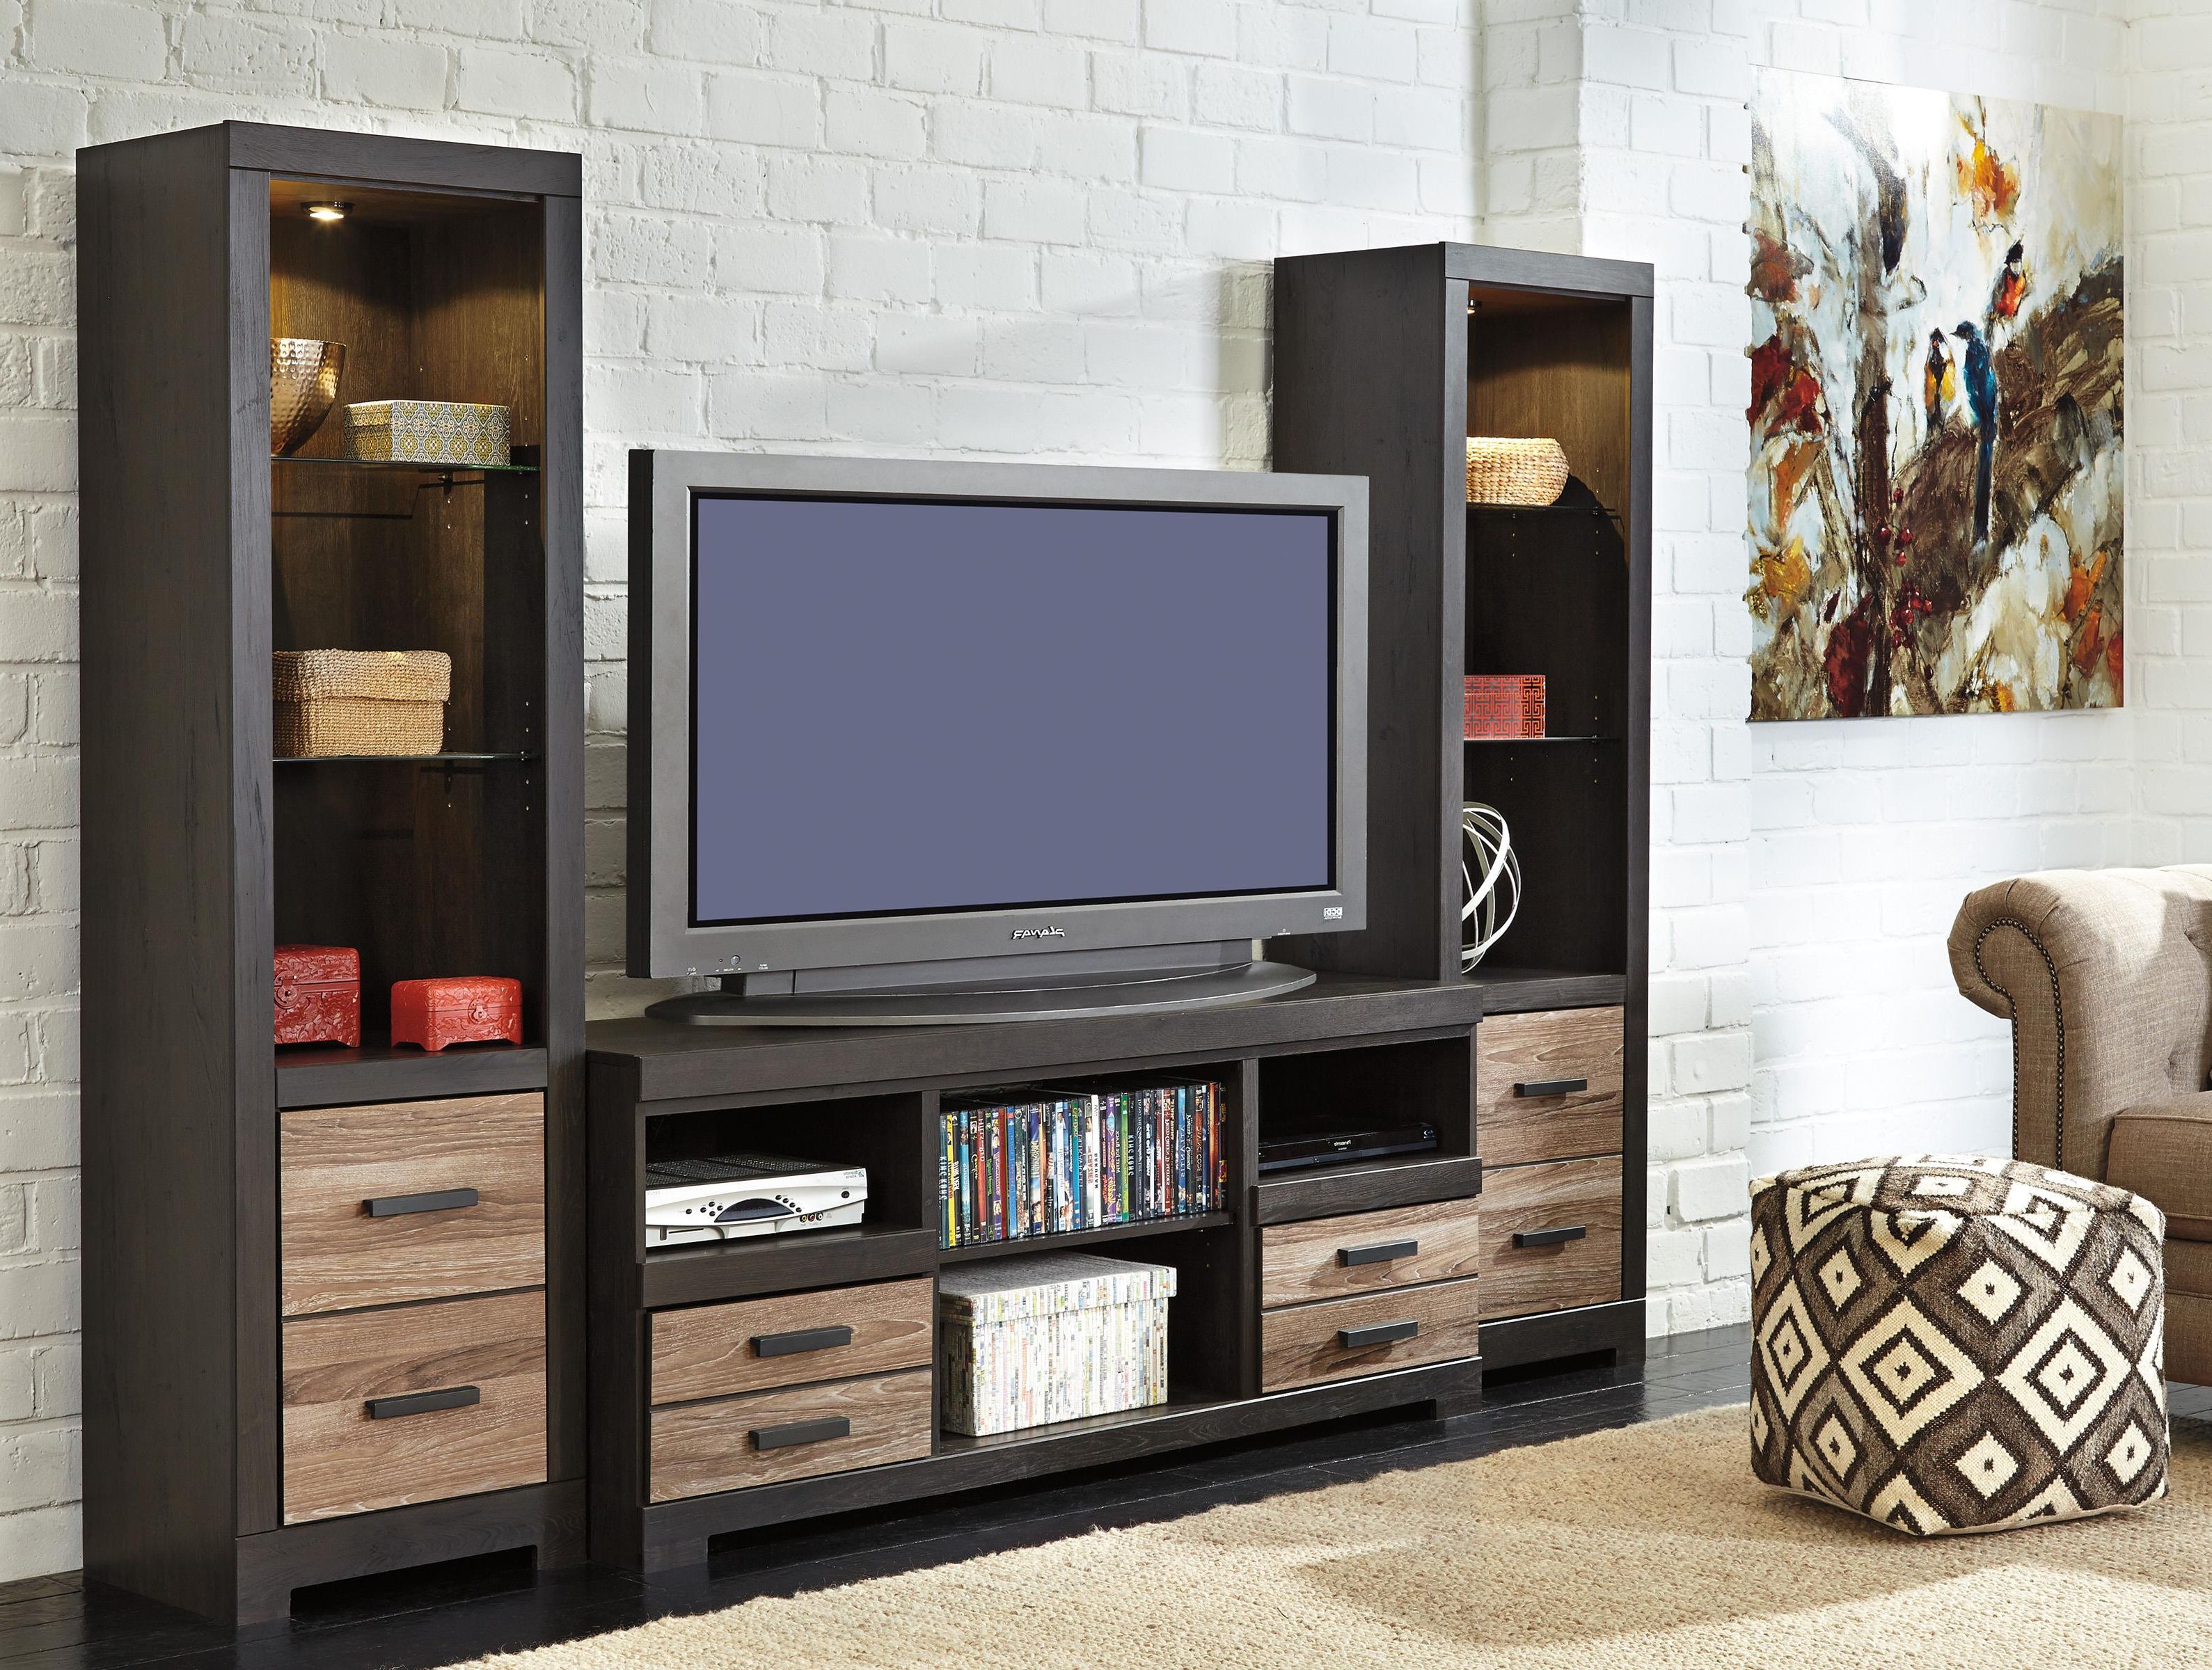 Newest Open Shelf Tv Stands Intended For Open Shelving Entertainment Center Tv Stand Back With Shelves Shelf (View 9 of 20)